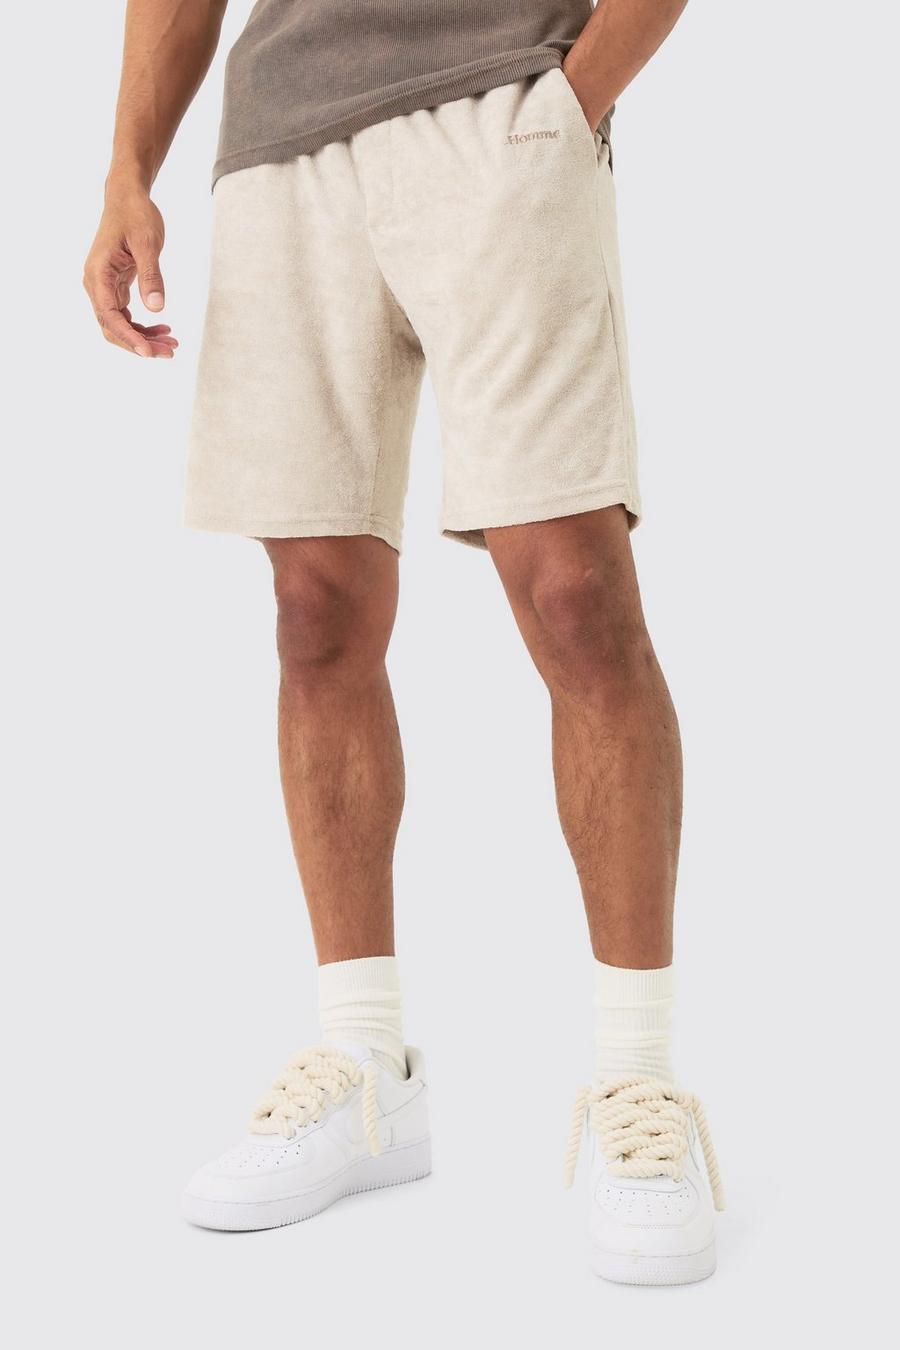 Lockere Frottee Homme Shorts, Stone